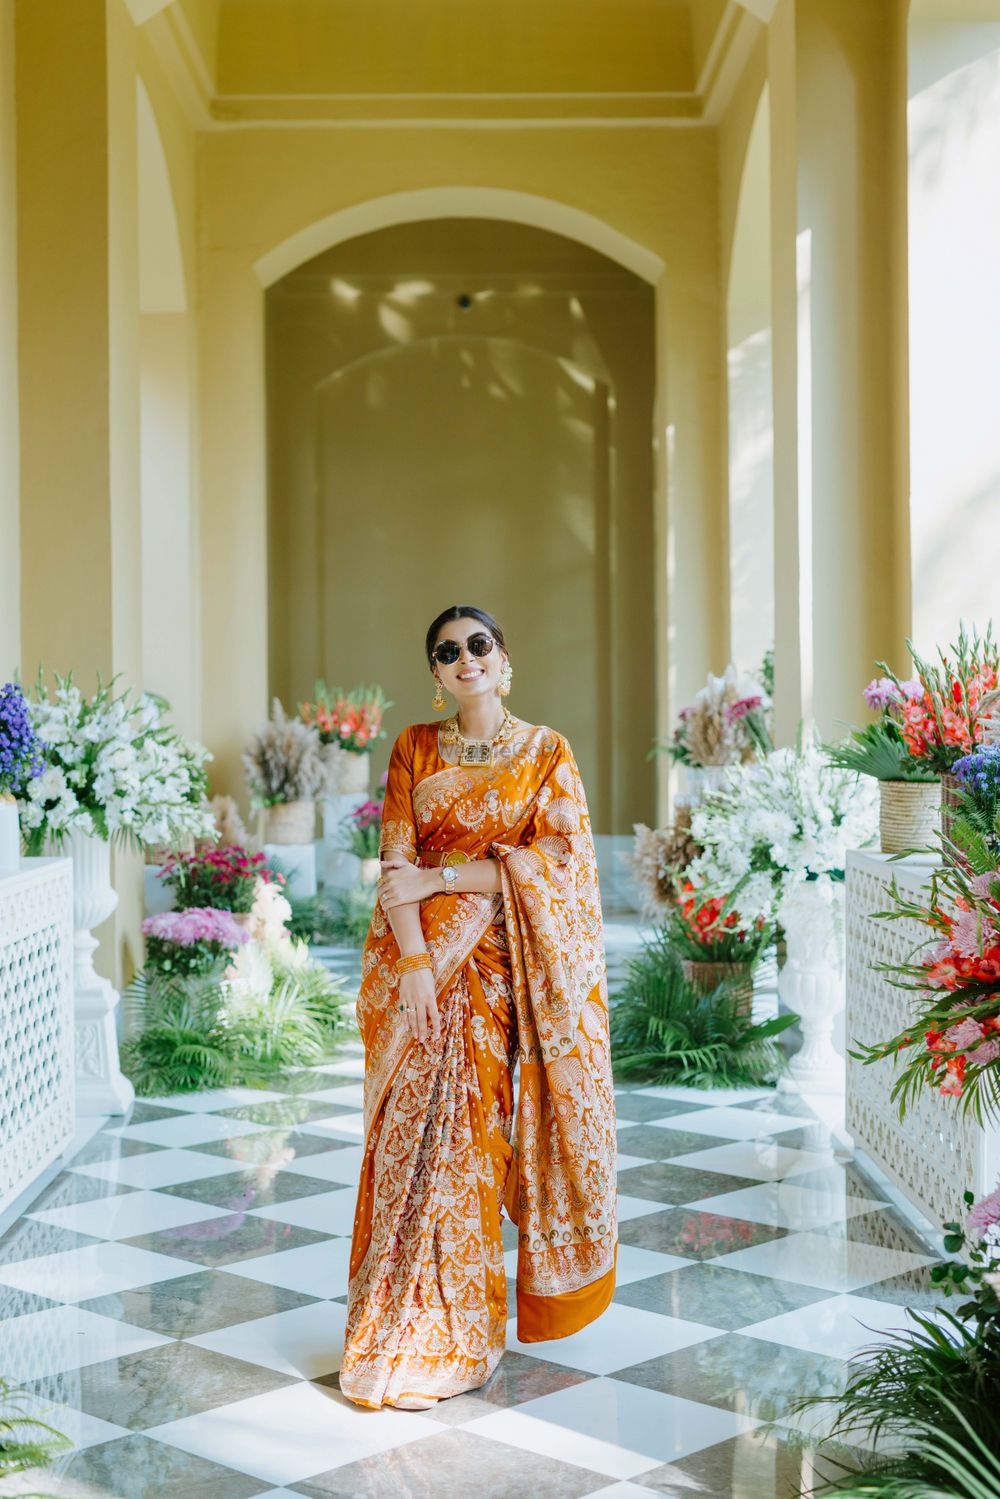 Photo of Bride in an orange saree for the mehndi